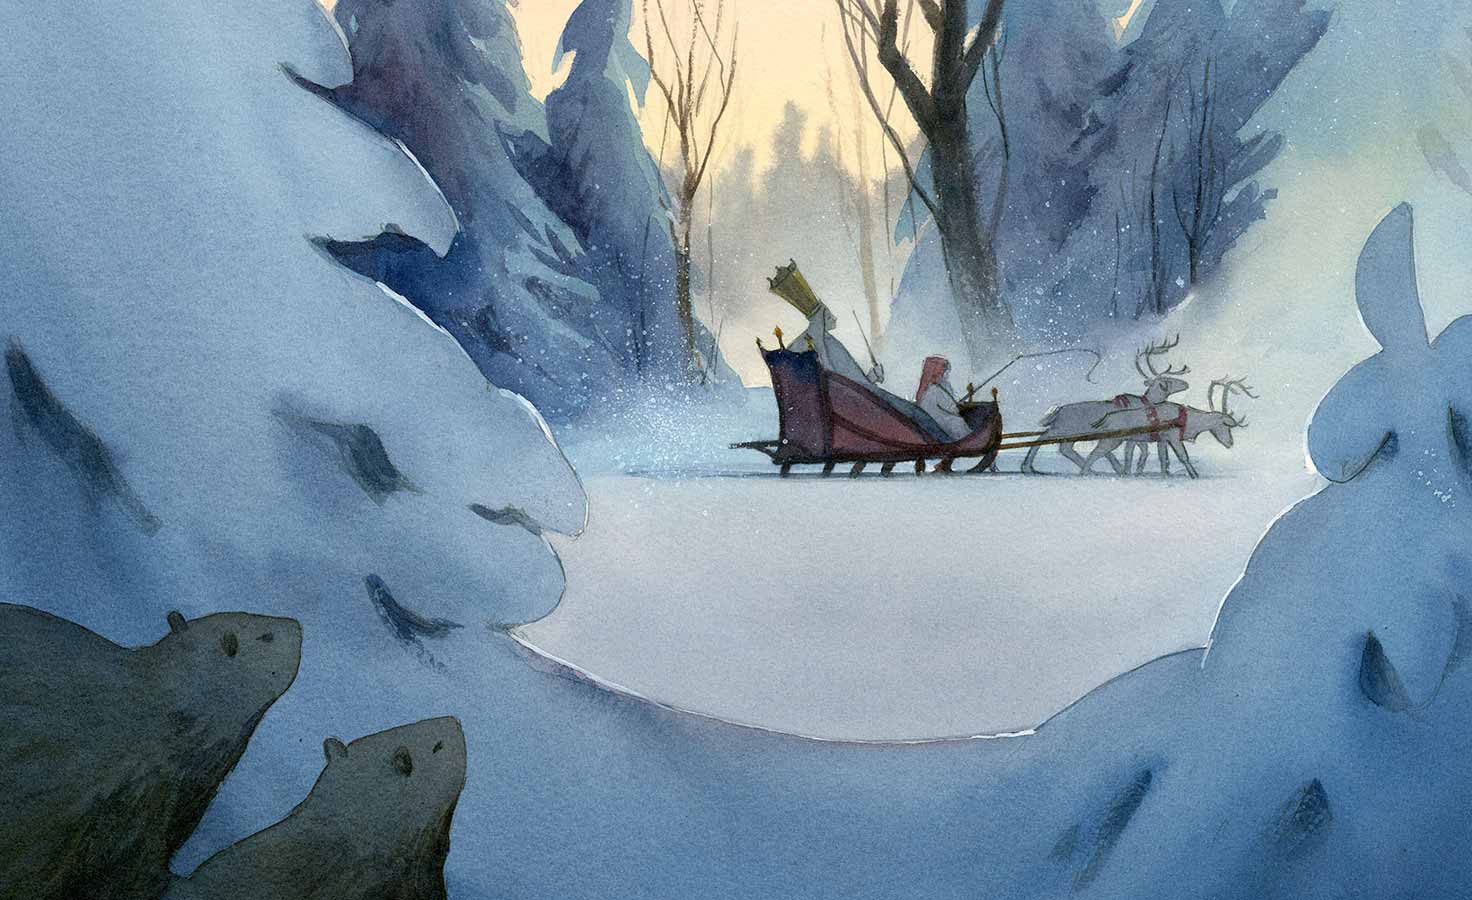 Watercolor illustration from interior of 'Finding Narnia' showing the White Witch riding through a snowy forest in a sleigh drawn by two reindeer, while two beavers look on from the foreground.